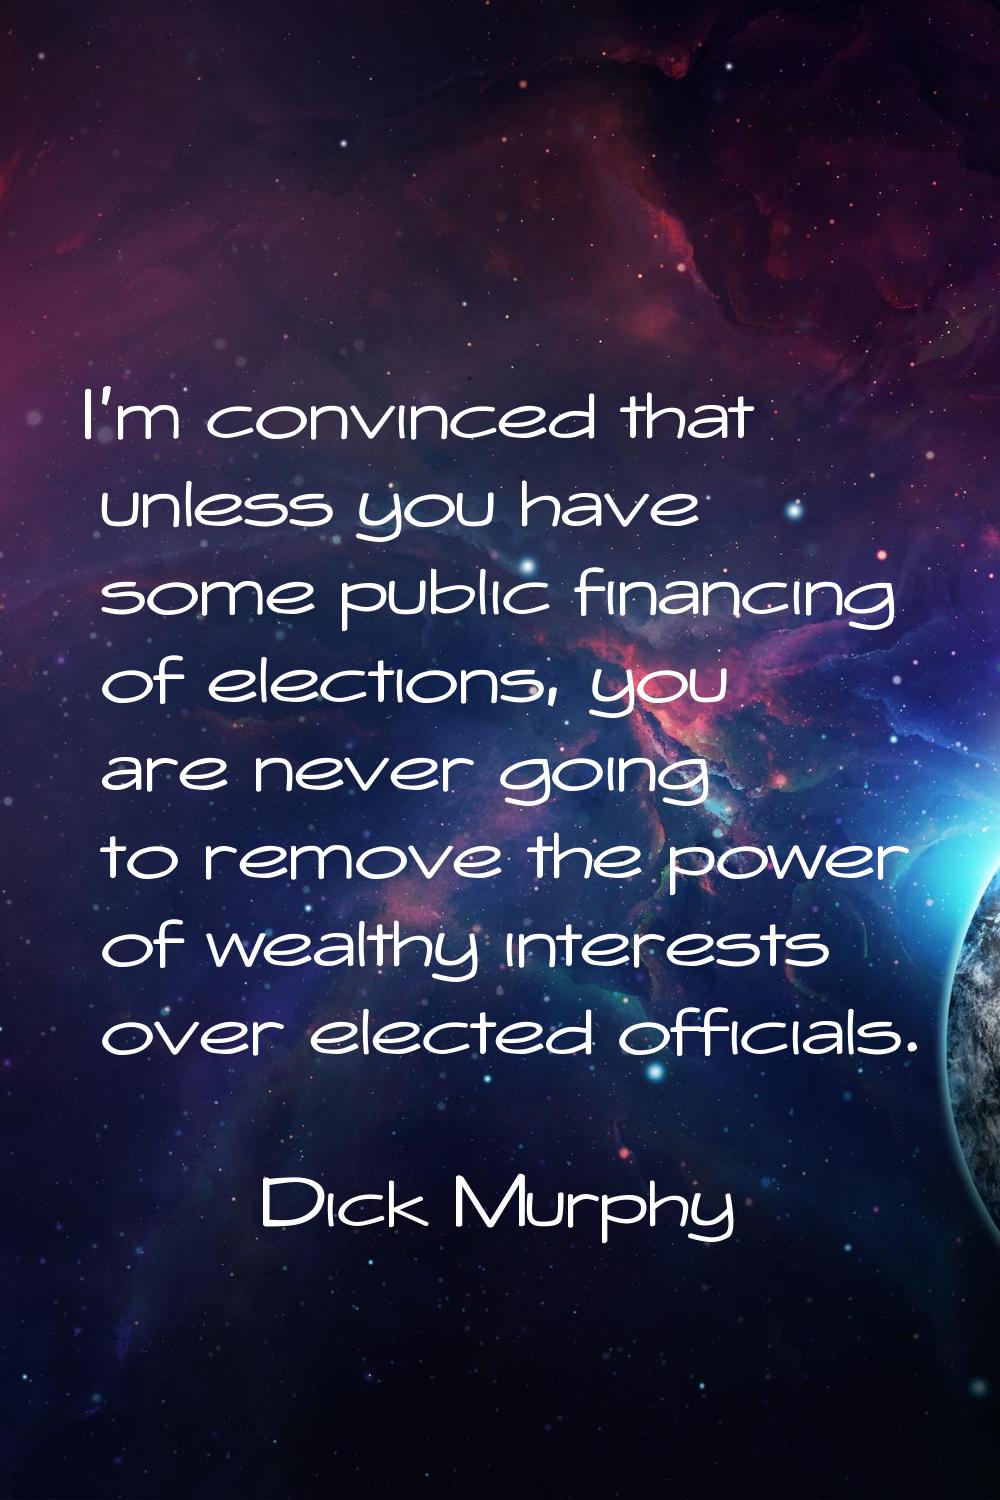 I'm convinced that unless you have some public financing of elections, you are never going to remov